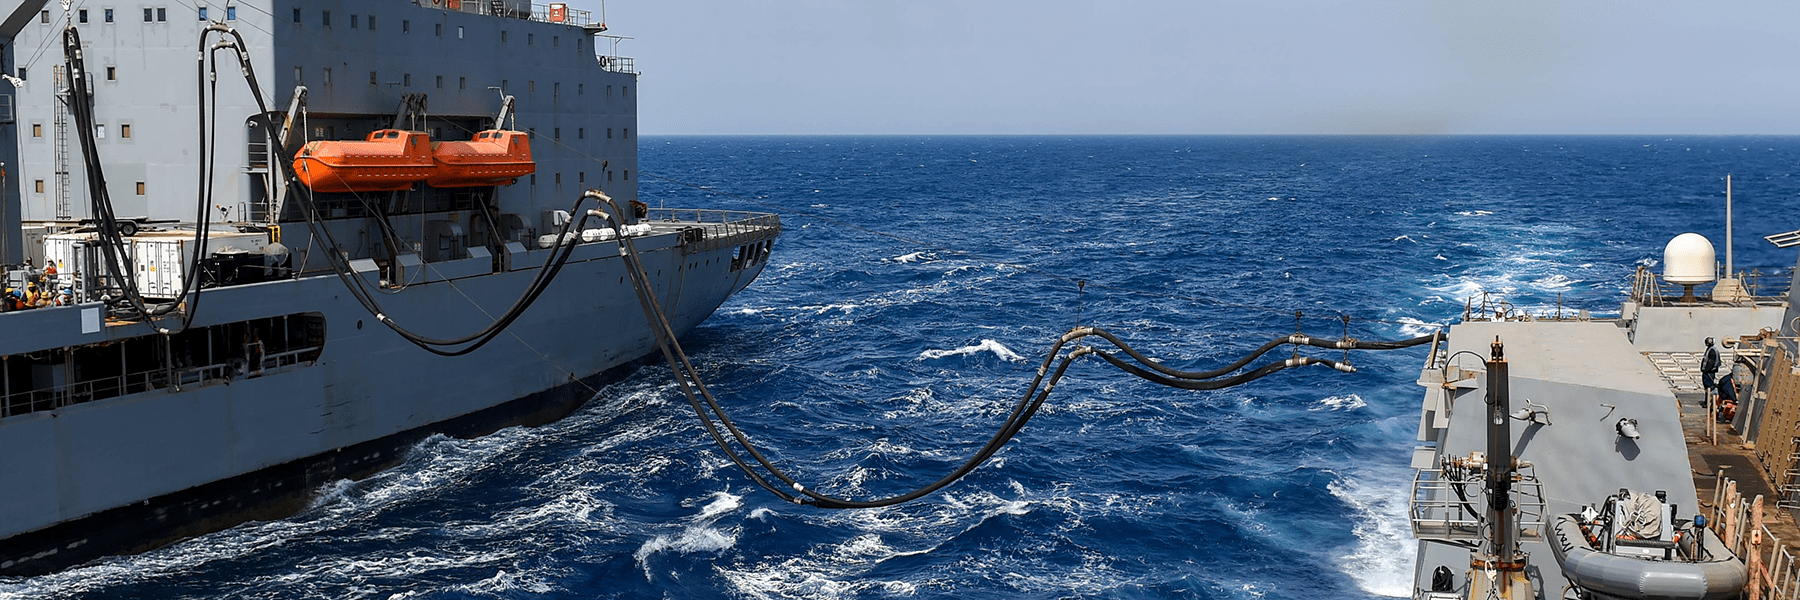 Supply ship fueling another ship while underway at sea